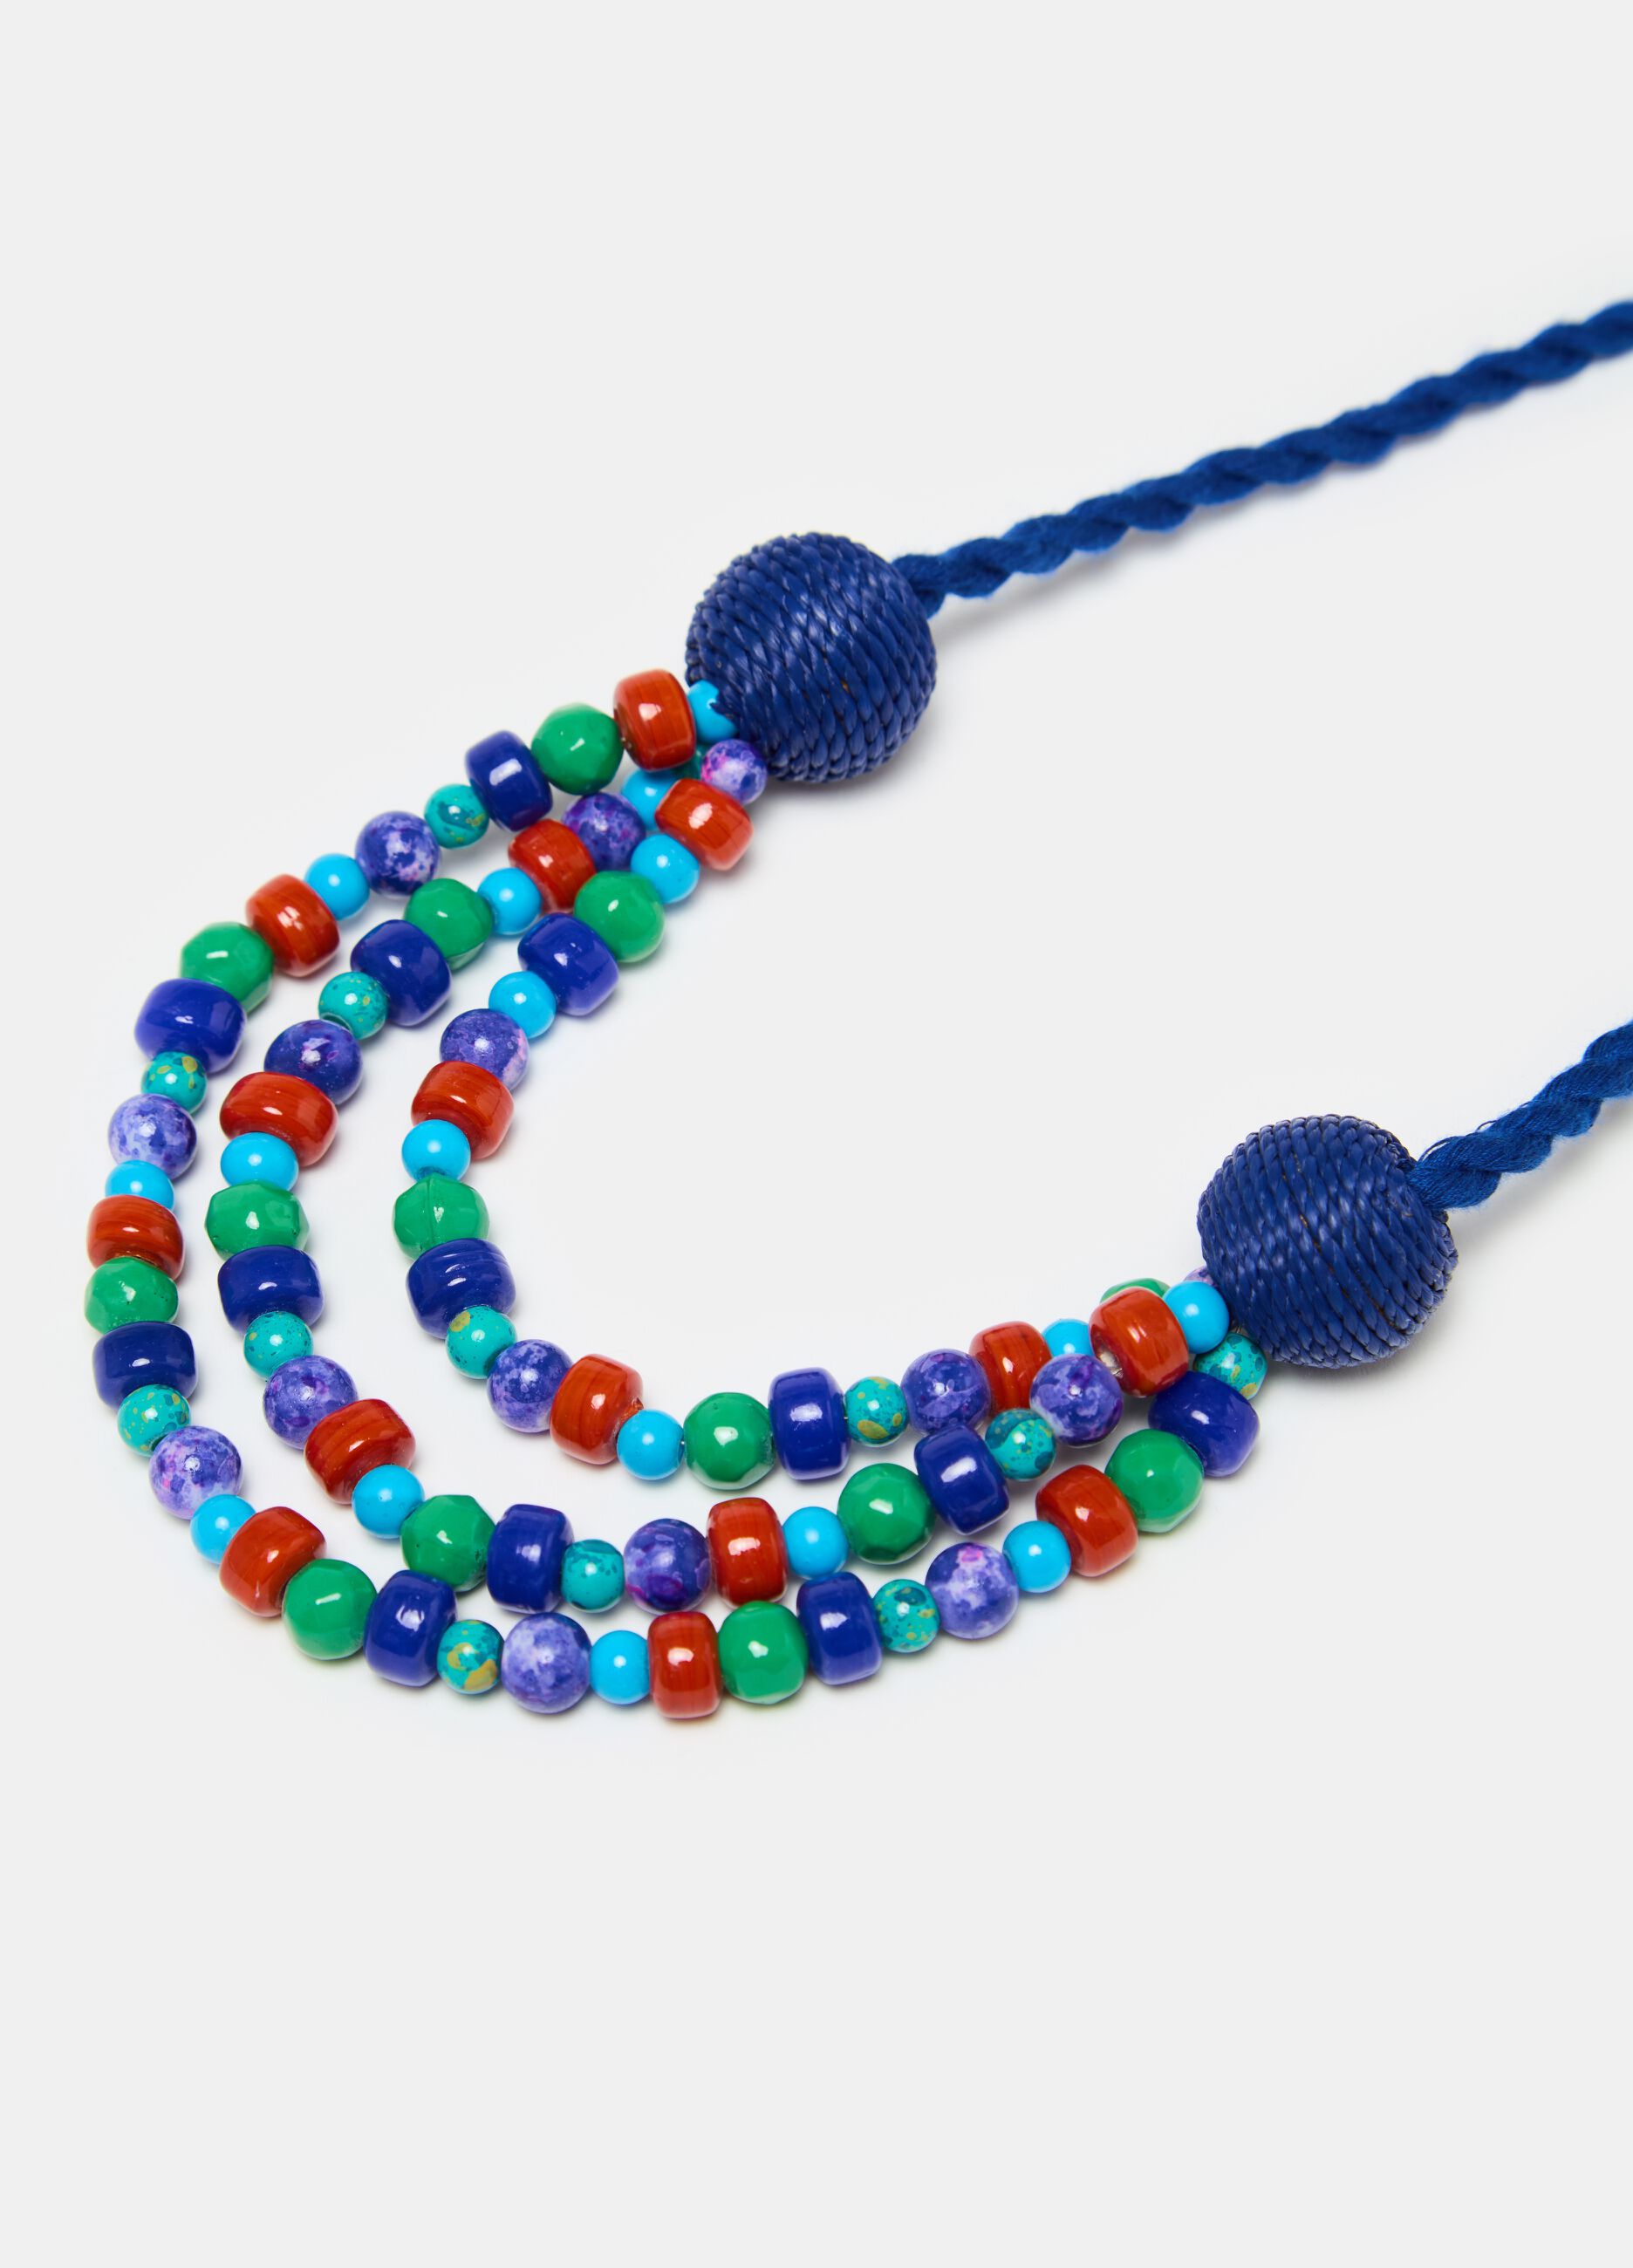 Necklace with colourful gems and cord